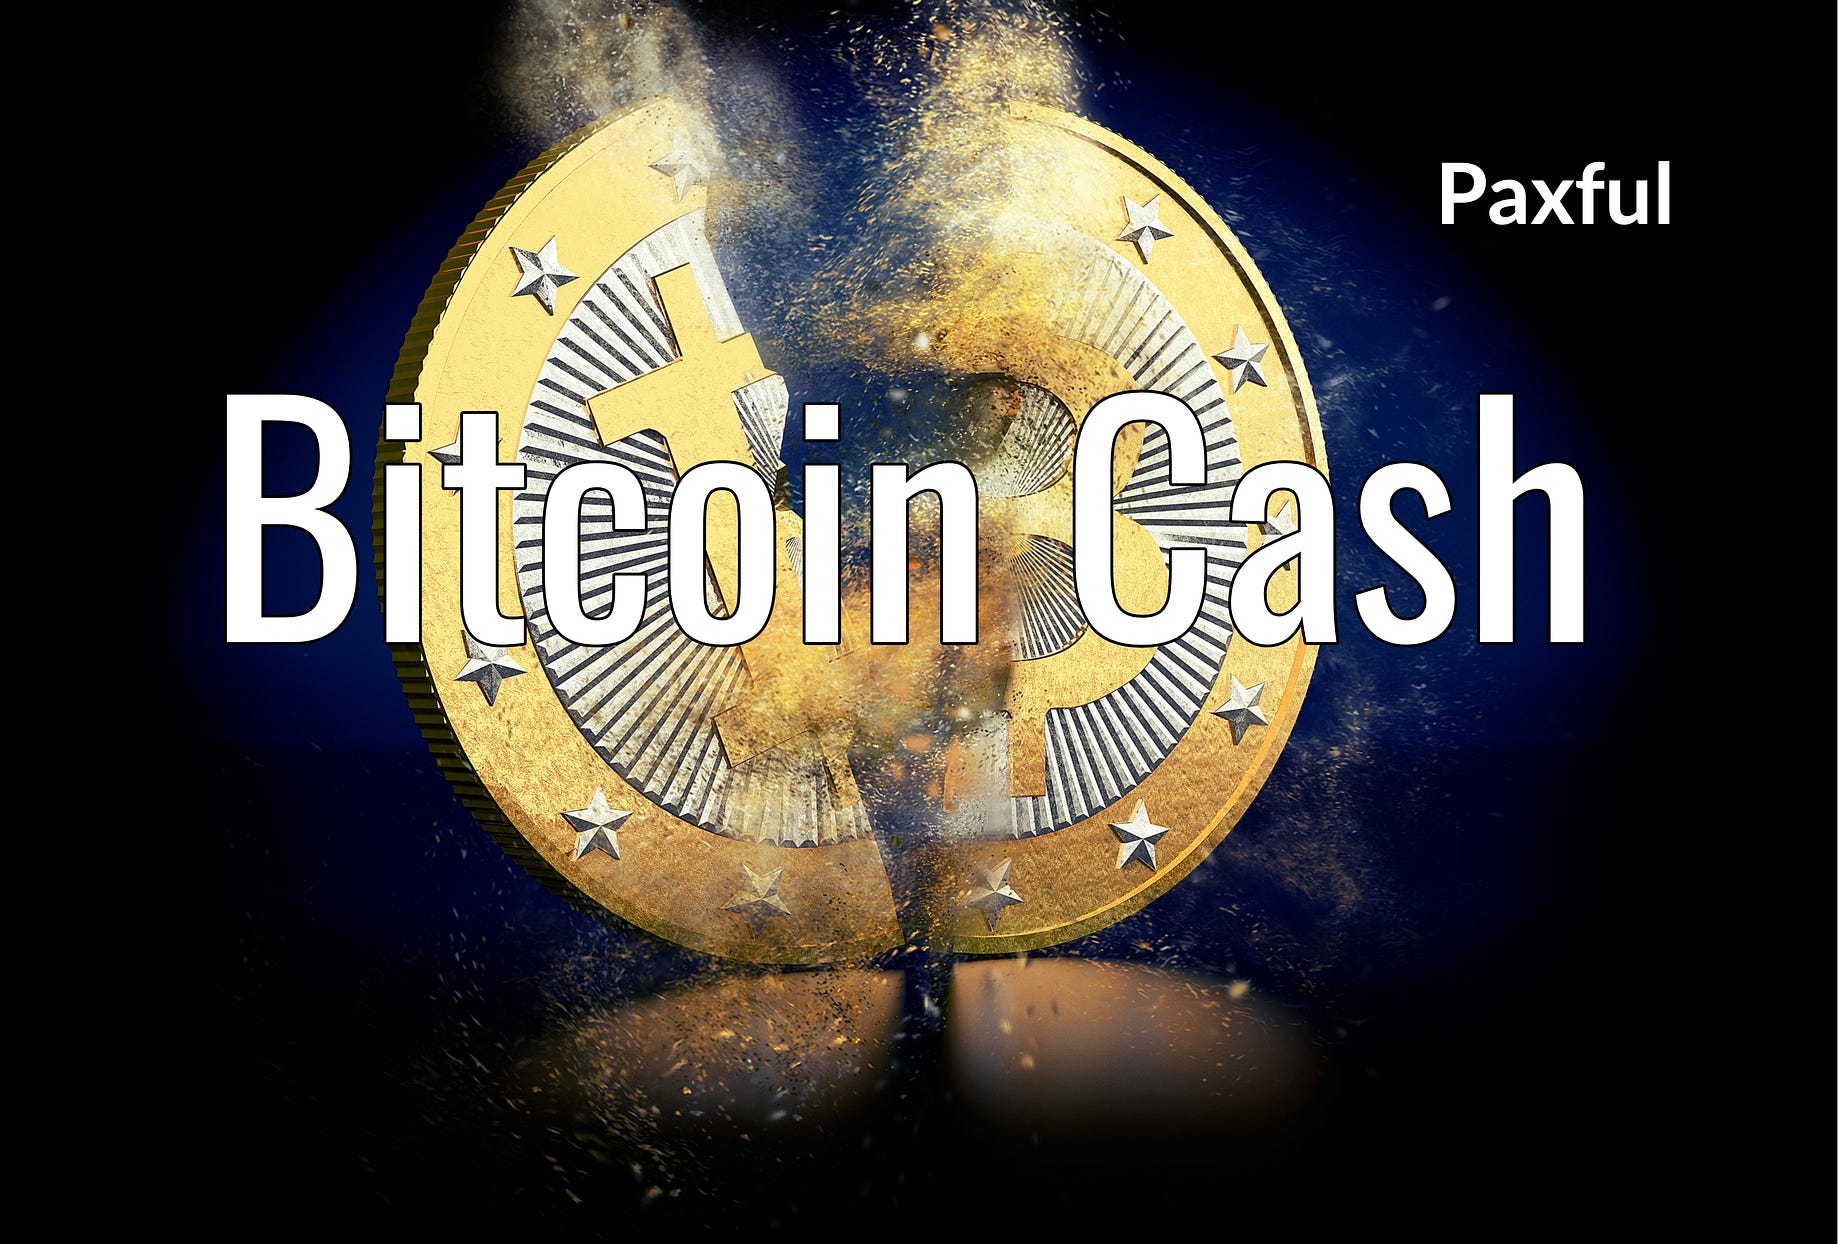 Paxful S Stance On Bitcoin Cash Bch After The Split - 